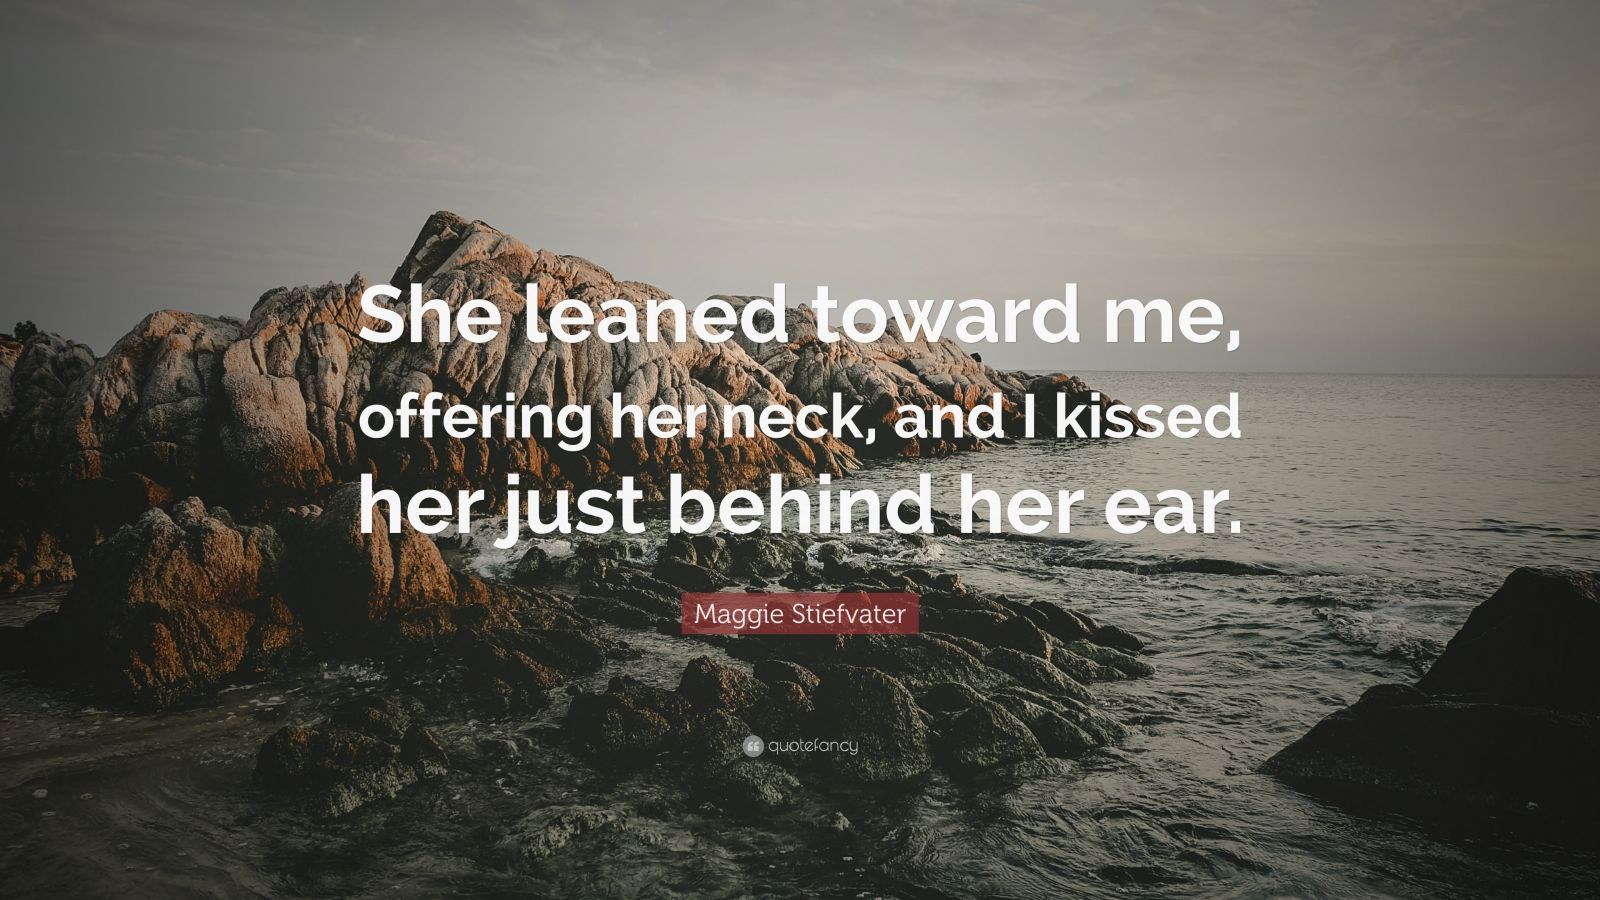 Maggie Stiefvater Quote: “She leaned toward me, offering her neck, and ...